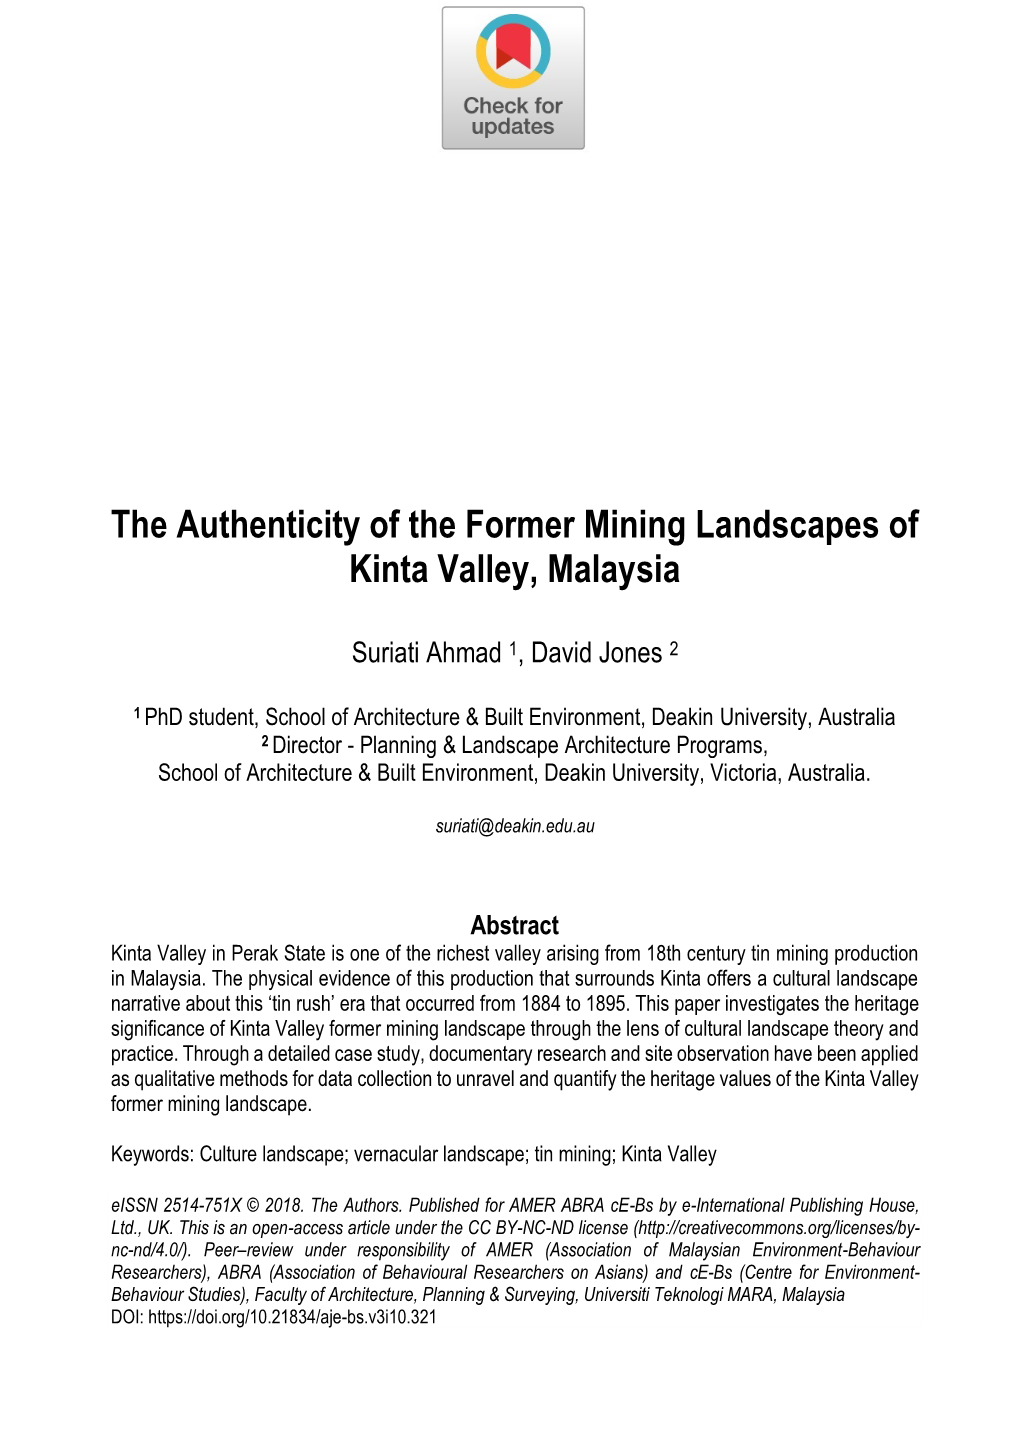 The Authenticity of the Former Mining Landscapes of Kinta Valley, Malaysia